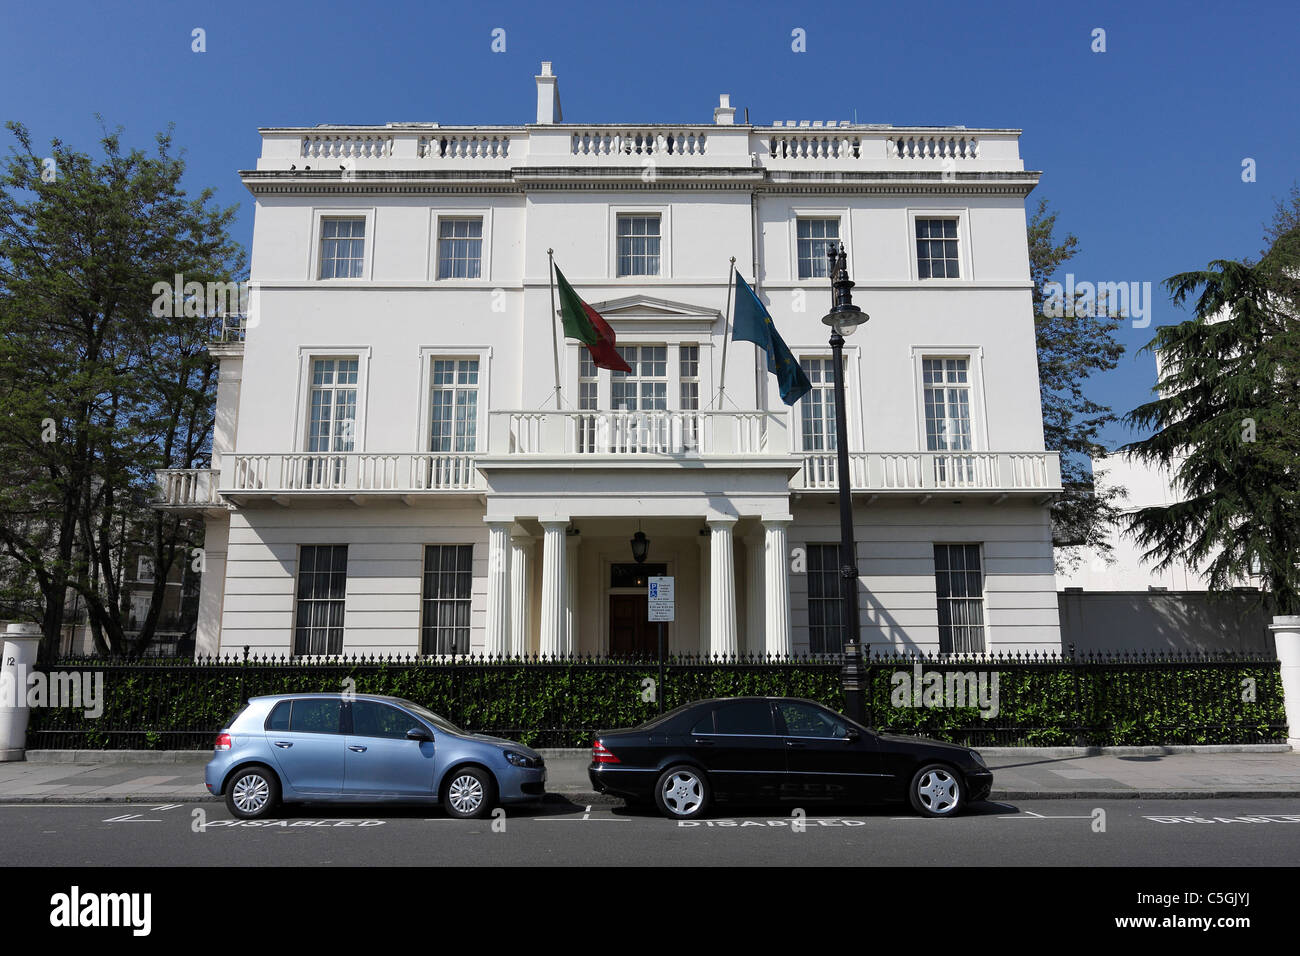 PORTUGUESE AMBASSADOR RESIDENCE,situated in the north west corner of exclusive Belgrave Square in London. Stock Photo